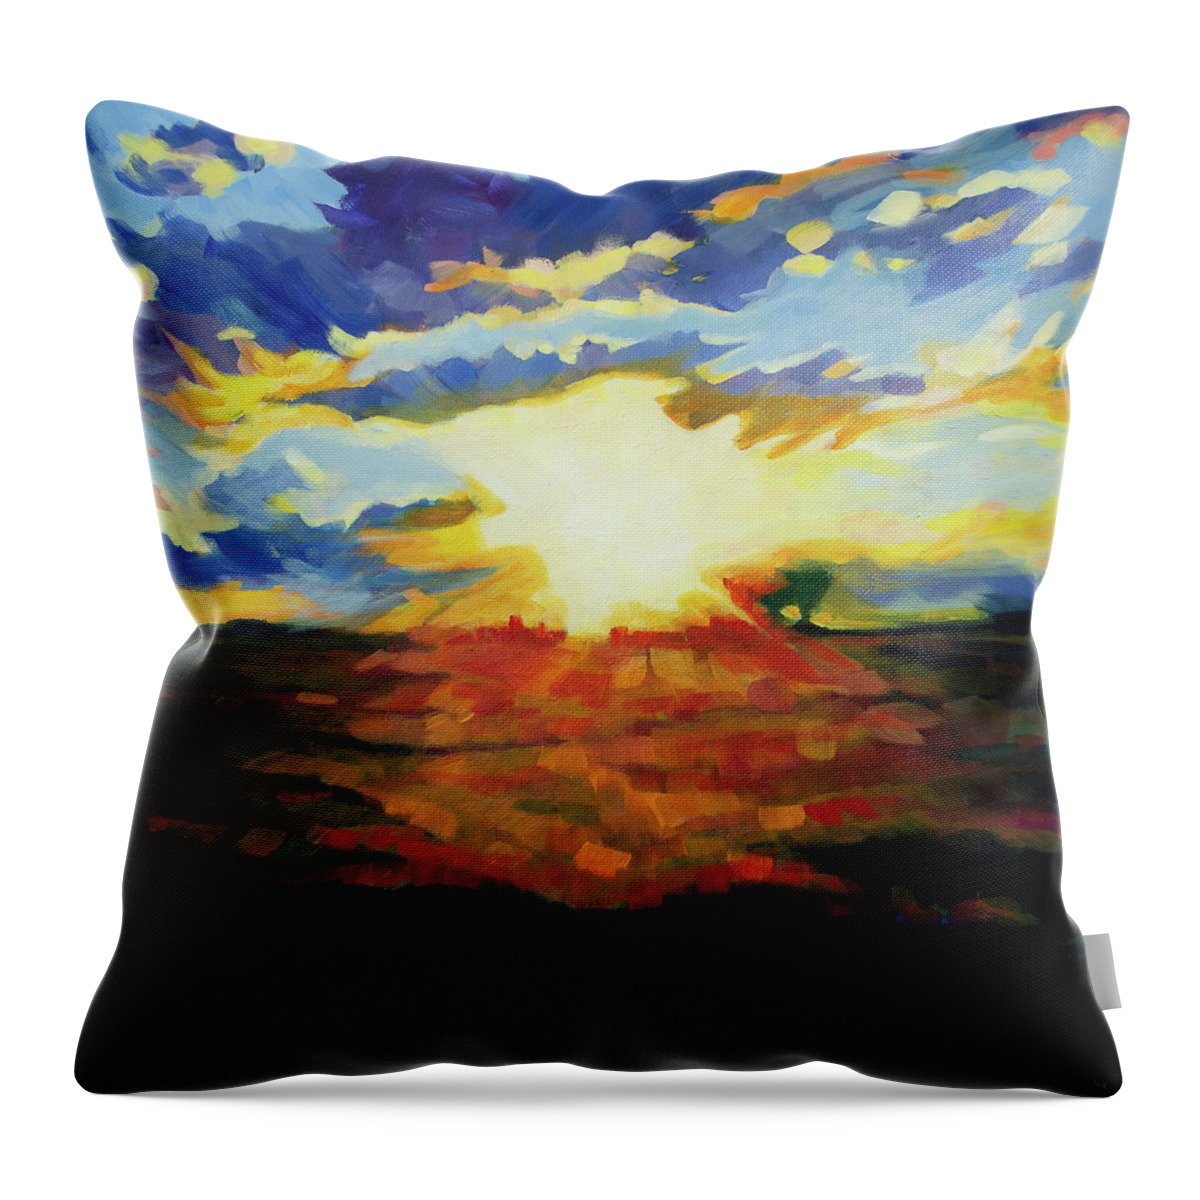 Landscape Throw Pillow featuring the painting Summer Evening by Amanda Schwabe